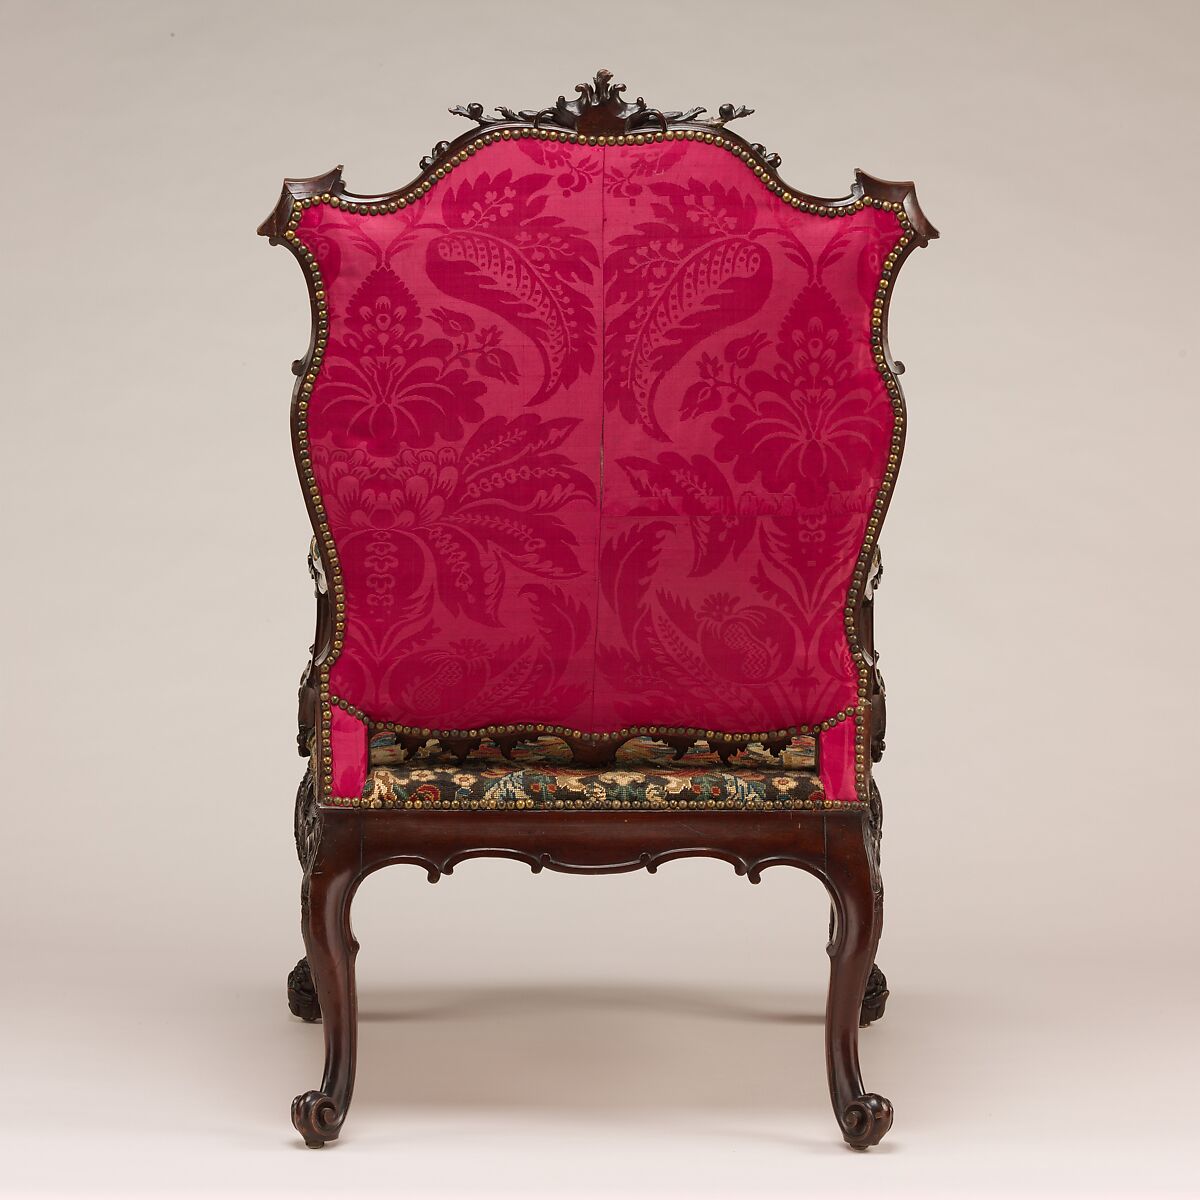 Armchair, After a design by Thomas Chippendale. The back of the chair is seen with a vibrant pink upholstery. 